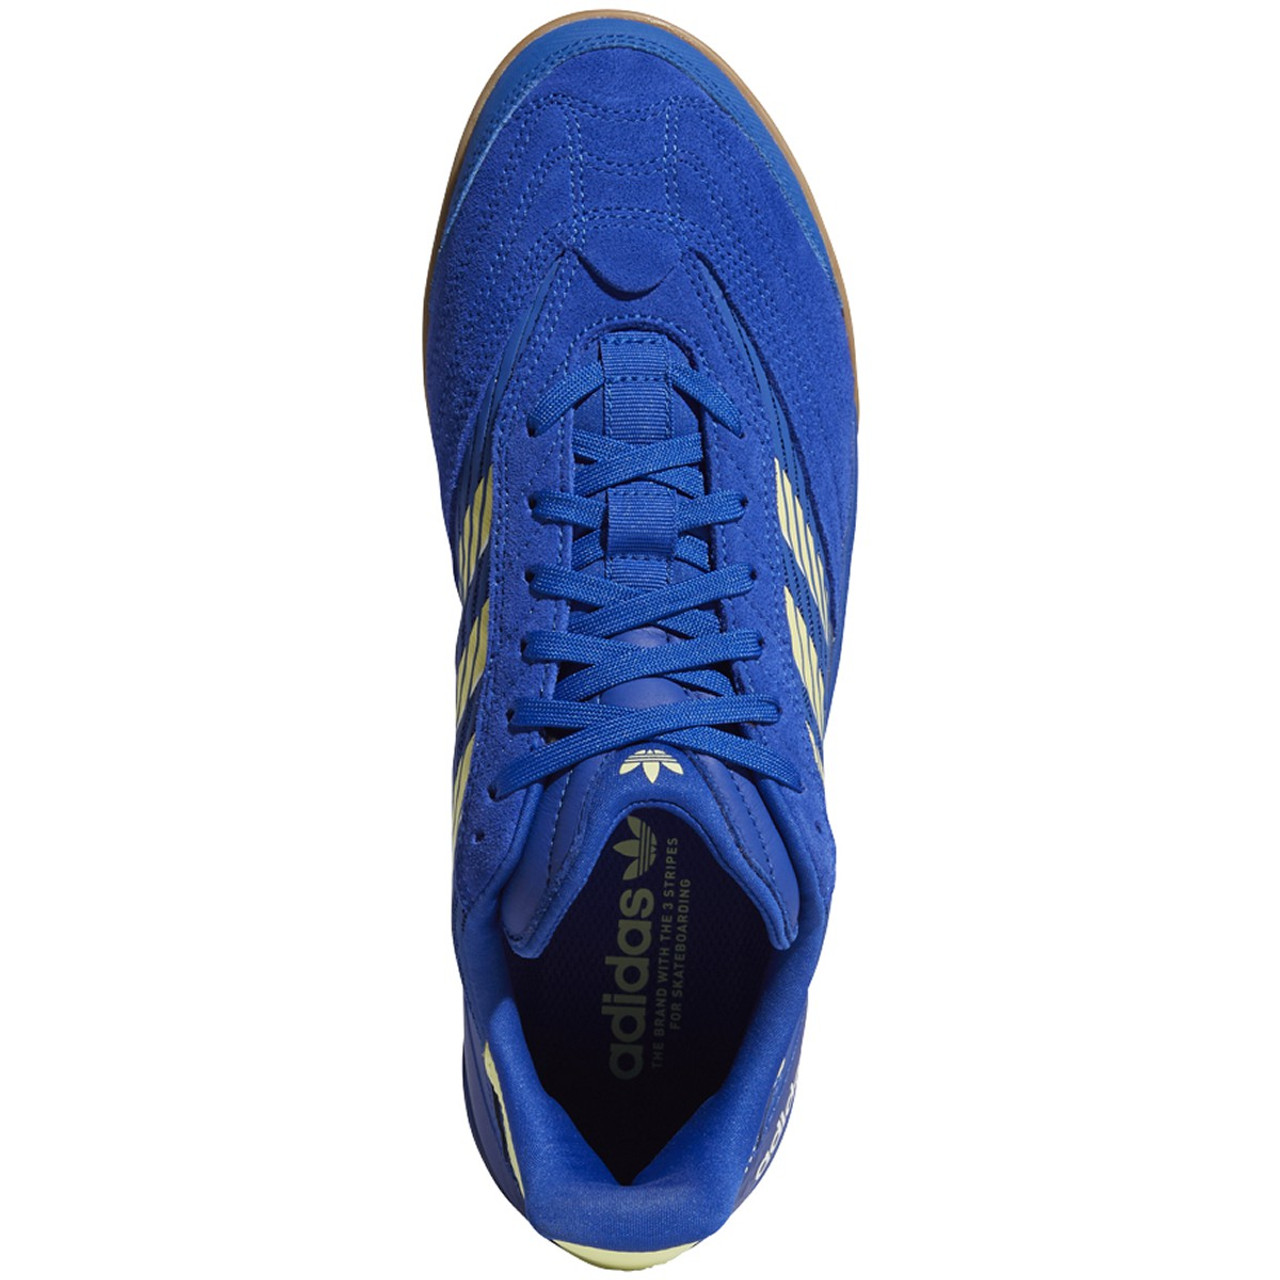 Adidas Copa Nationale Shoes Royal Yellow